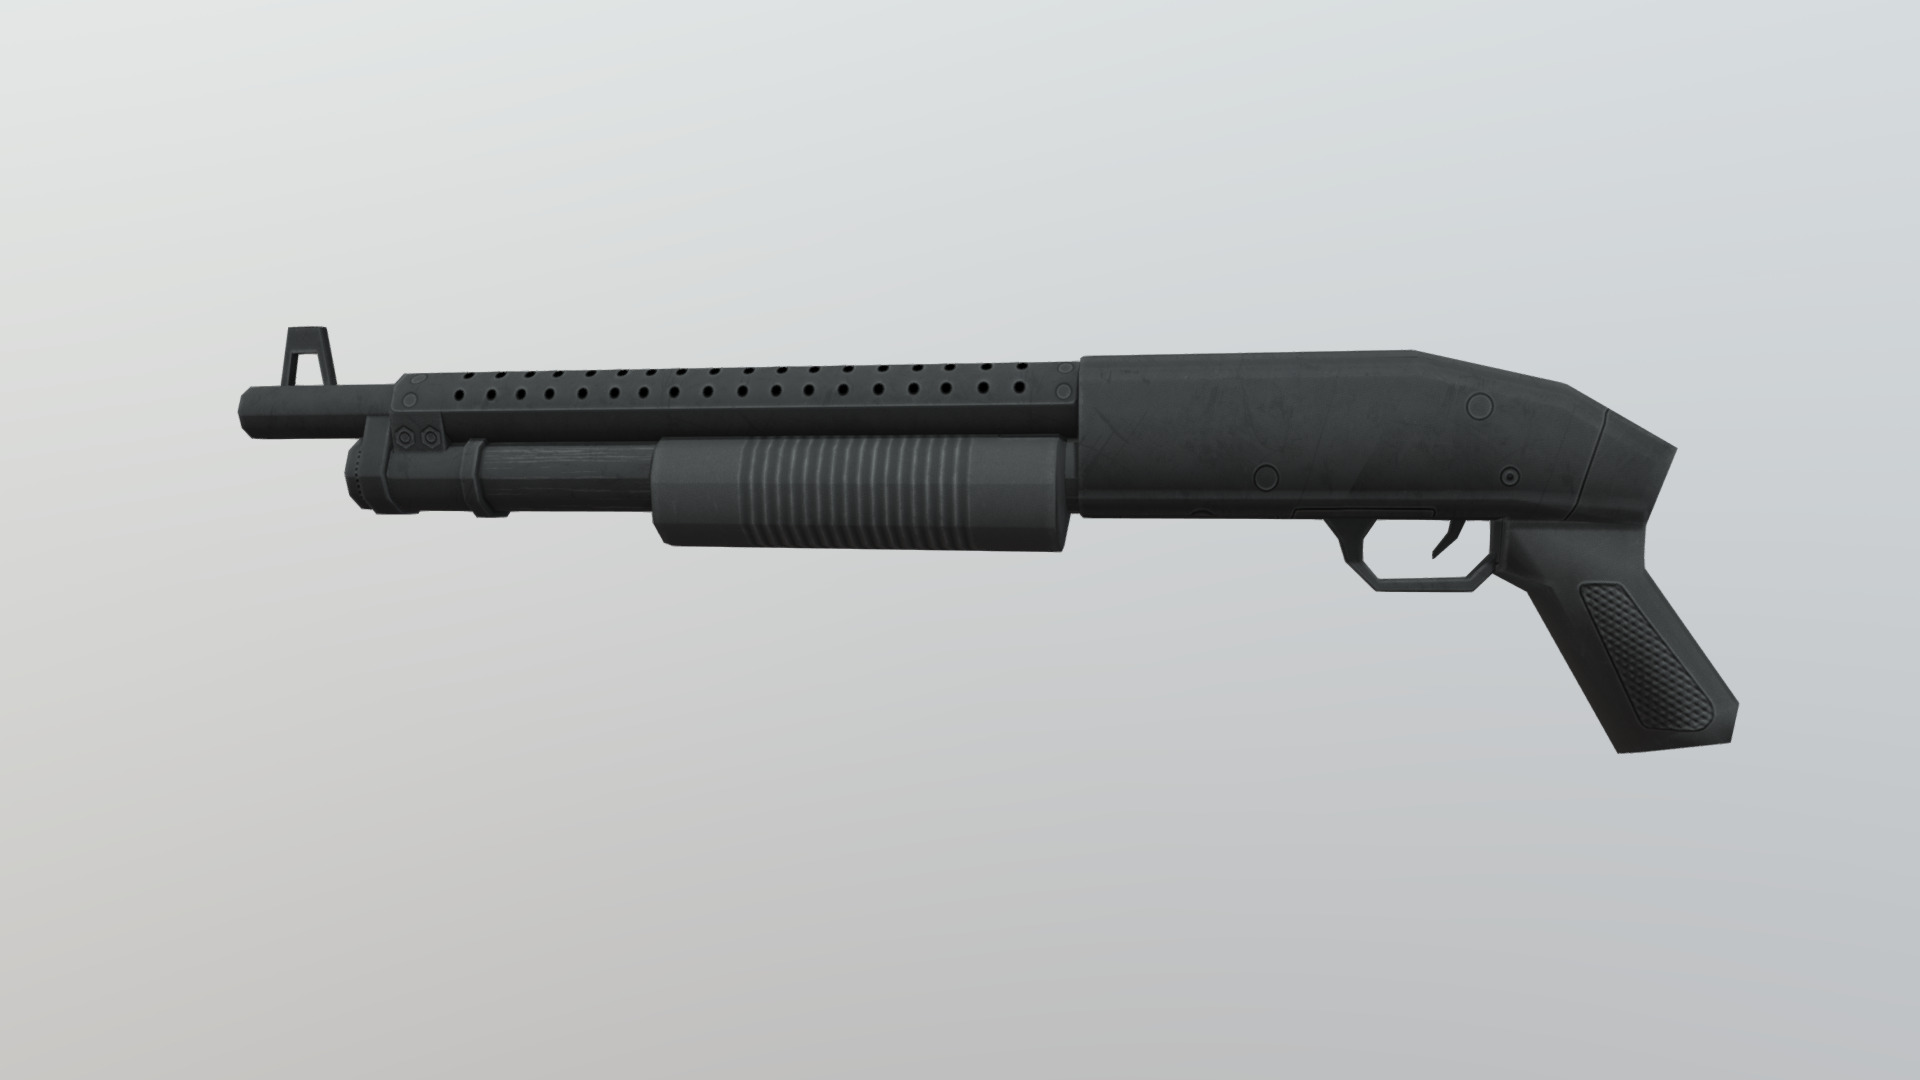 3D Shotgun
The pack has highly detailed shotgun ready for use in your project. Just drag and drop prefabs into your scene and achieve beautiful results in no time. Available formats FBX, 3DS Max 2017



We are here to empower the creators. Please contact us via the [Contact US](https://aaanimators.com/#contact-area) page if you are having issues with our assets. 




The following document provides a highly detailed description of the asset:
[READ ME]()




**Mesh complexities:**


Shotgun 691 verts; 602 tris; uv; uv2; uv3; uv4



Includes 1 sets of textures with 3 materials:



● Diffuse

● Normal

● Specular - Low Poly Shotgun Pack - Buy Royalty Free 3D model by aaanimators 3d model